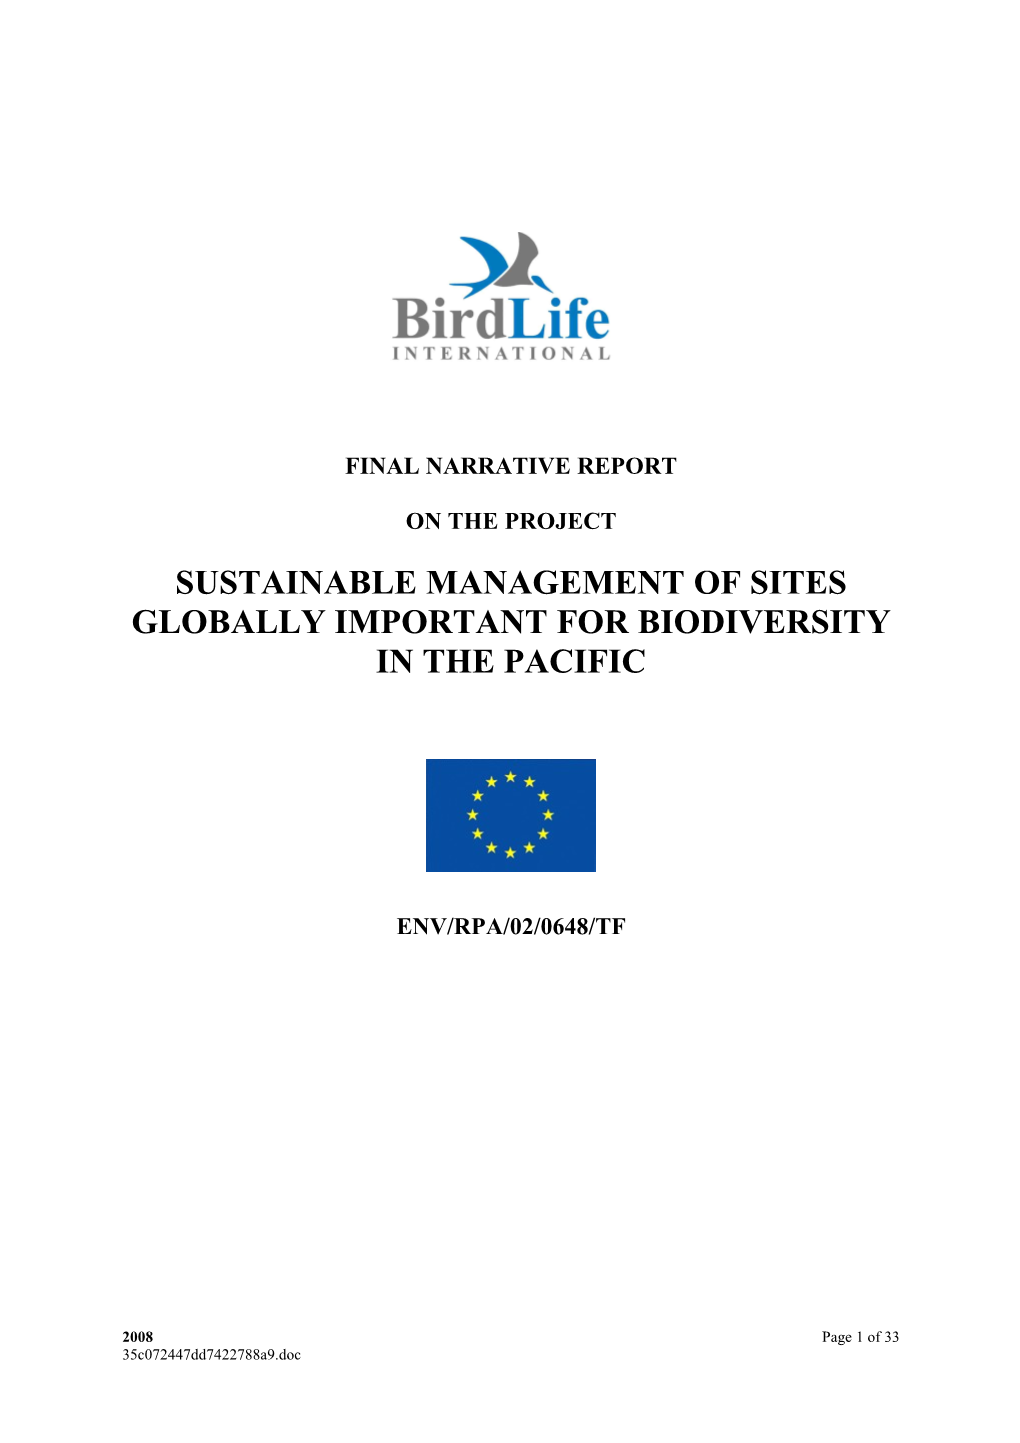 Sustainable Management of Sites Globally Important for Biodiversity in the Pacific